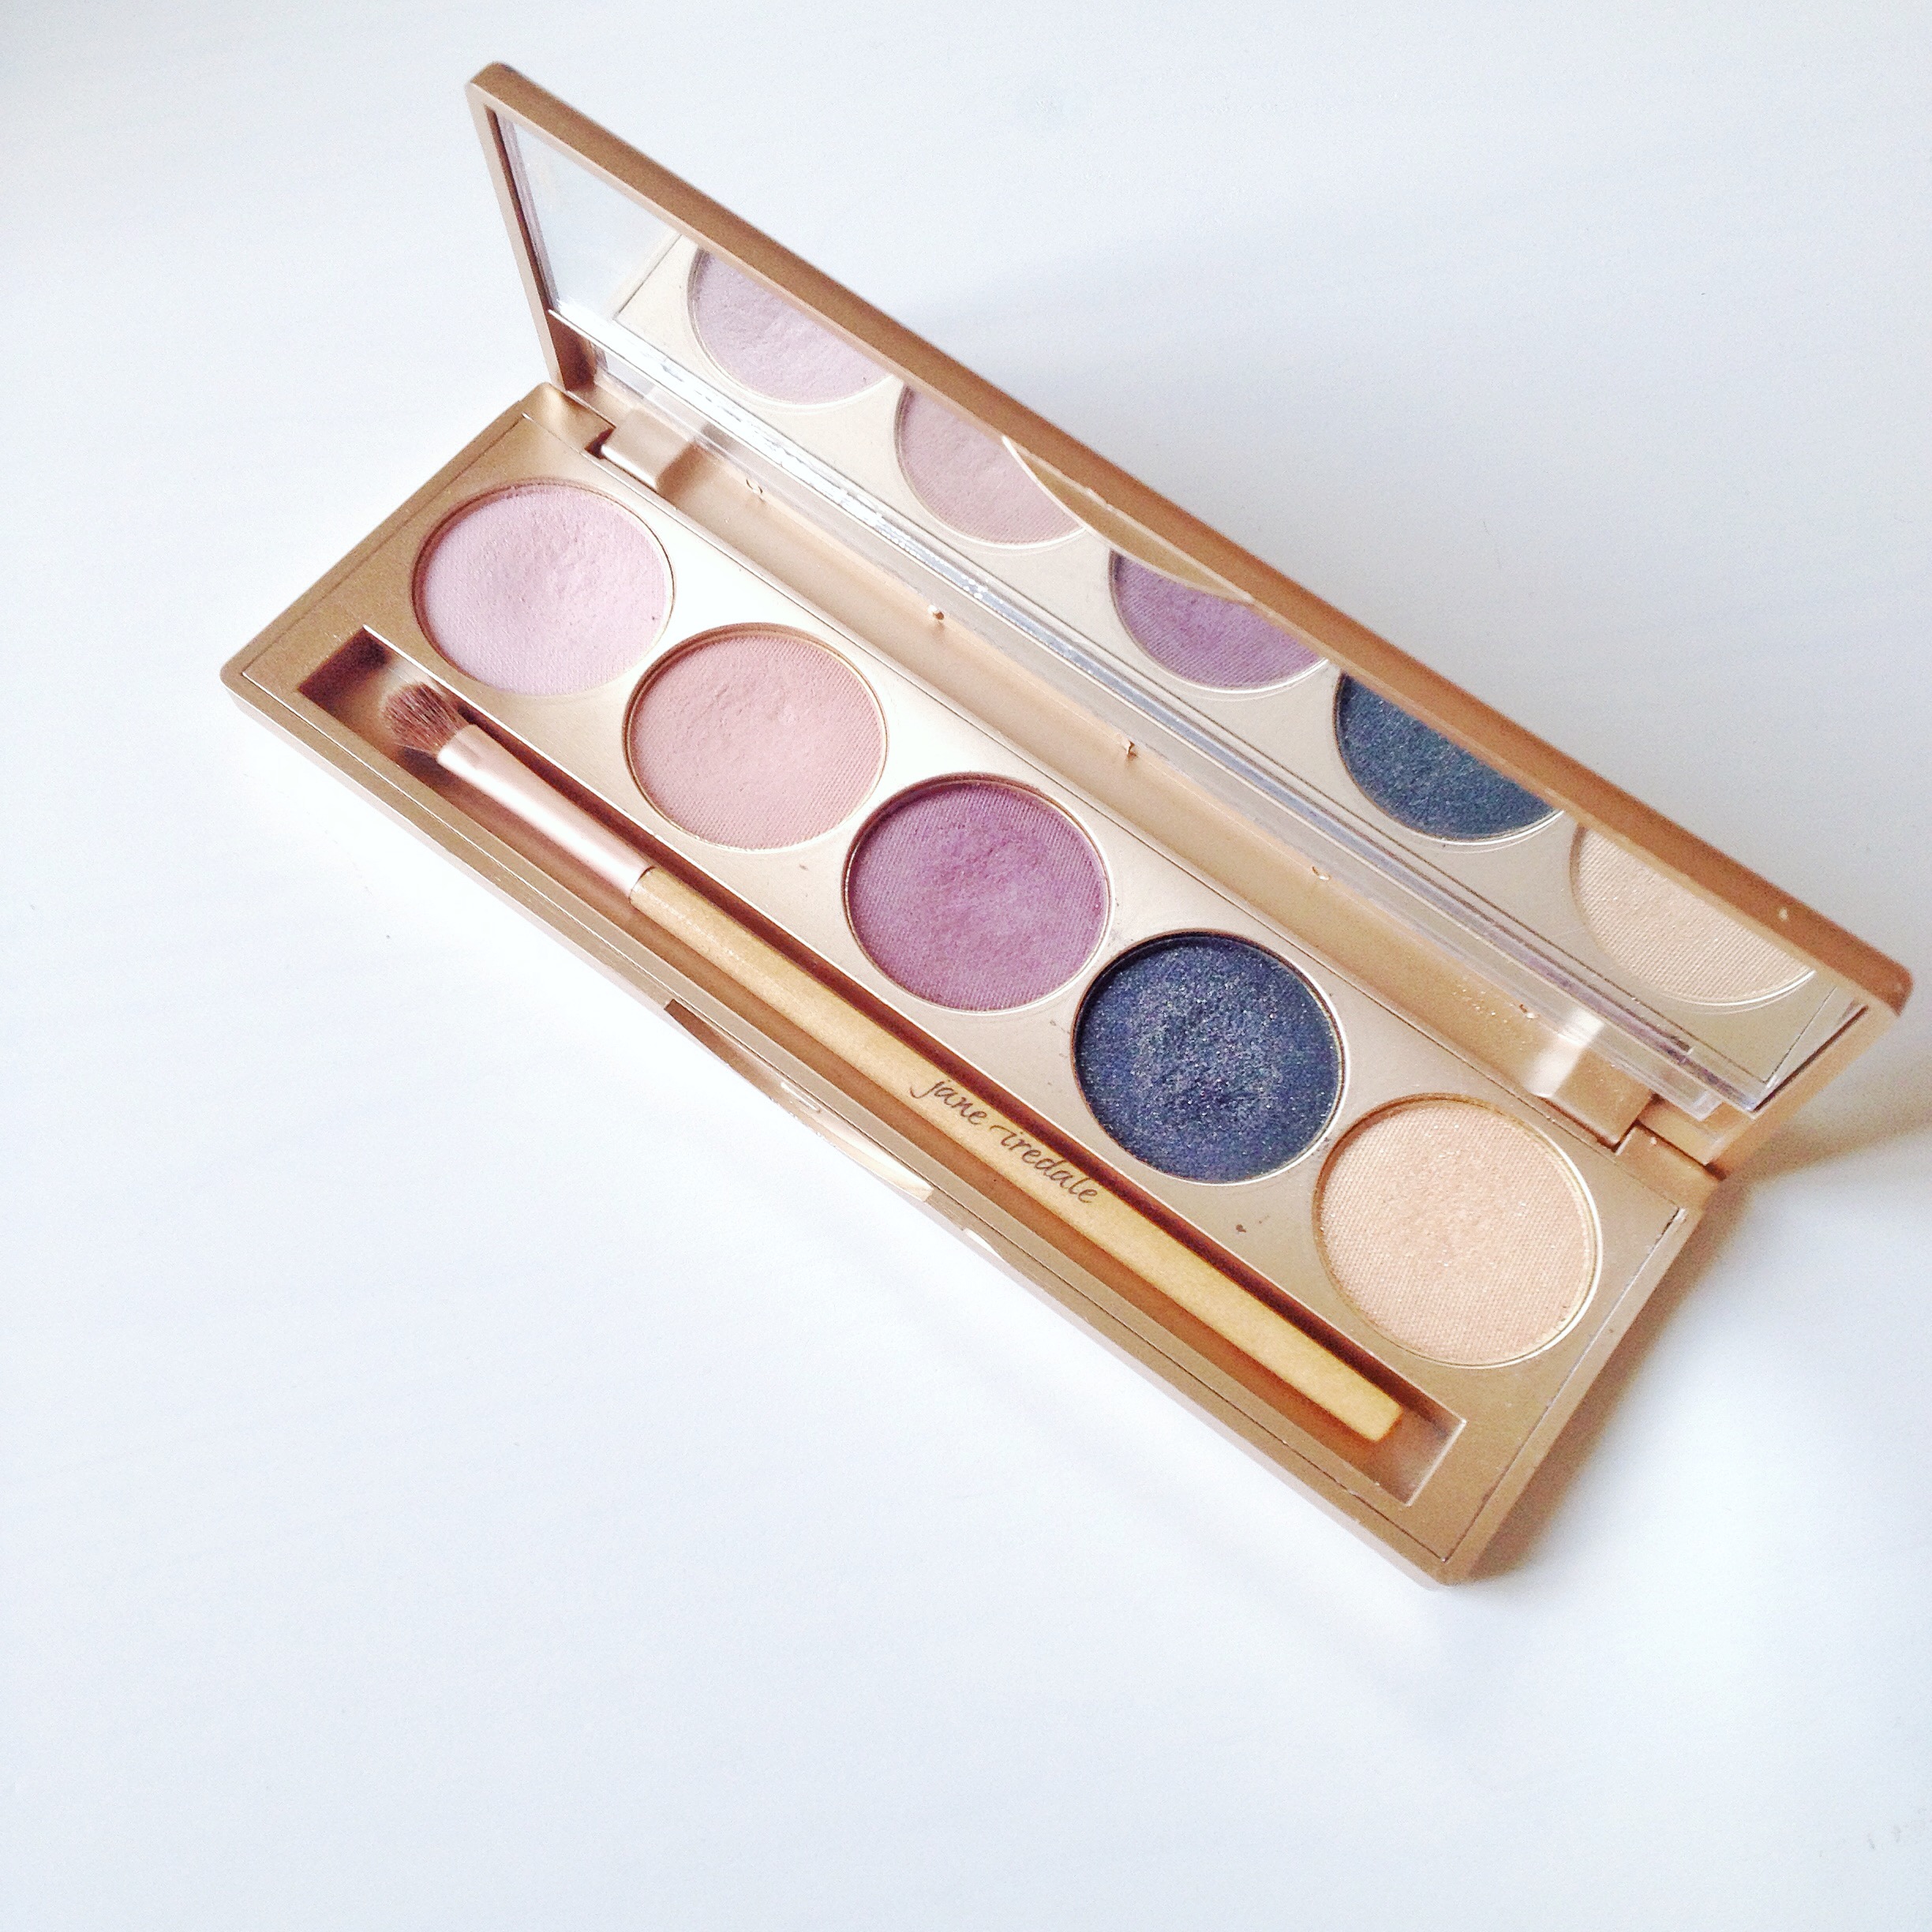 Jane Iredale "Smoke Gets in Your Eyes Eye Shadow Kit"/ Pic by 1FDLE.